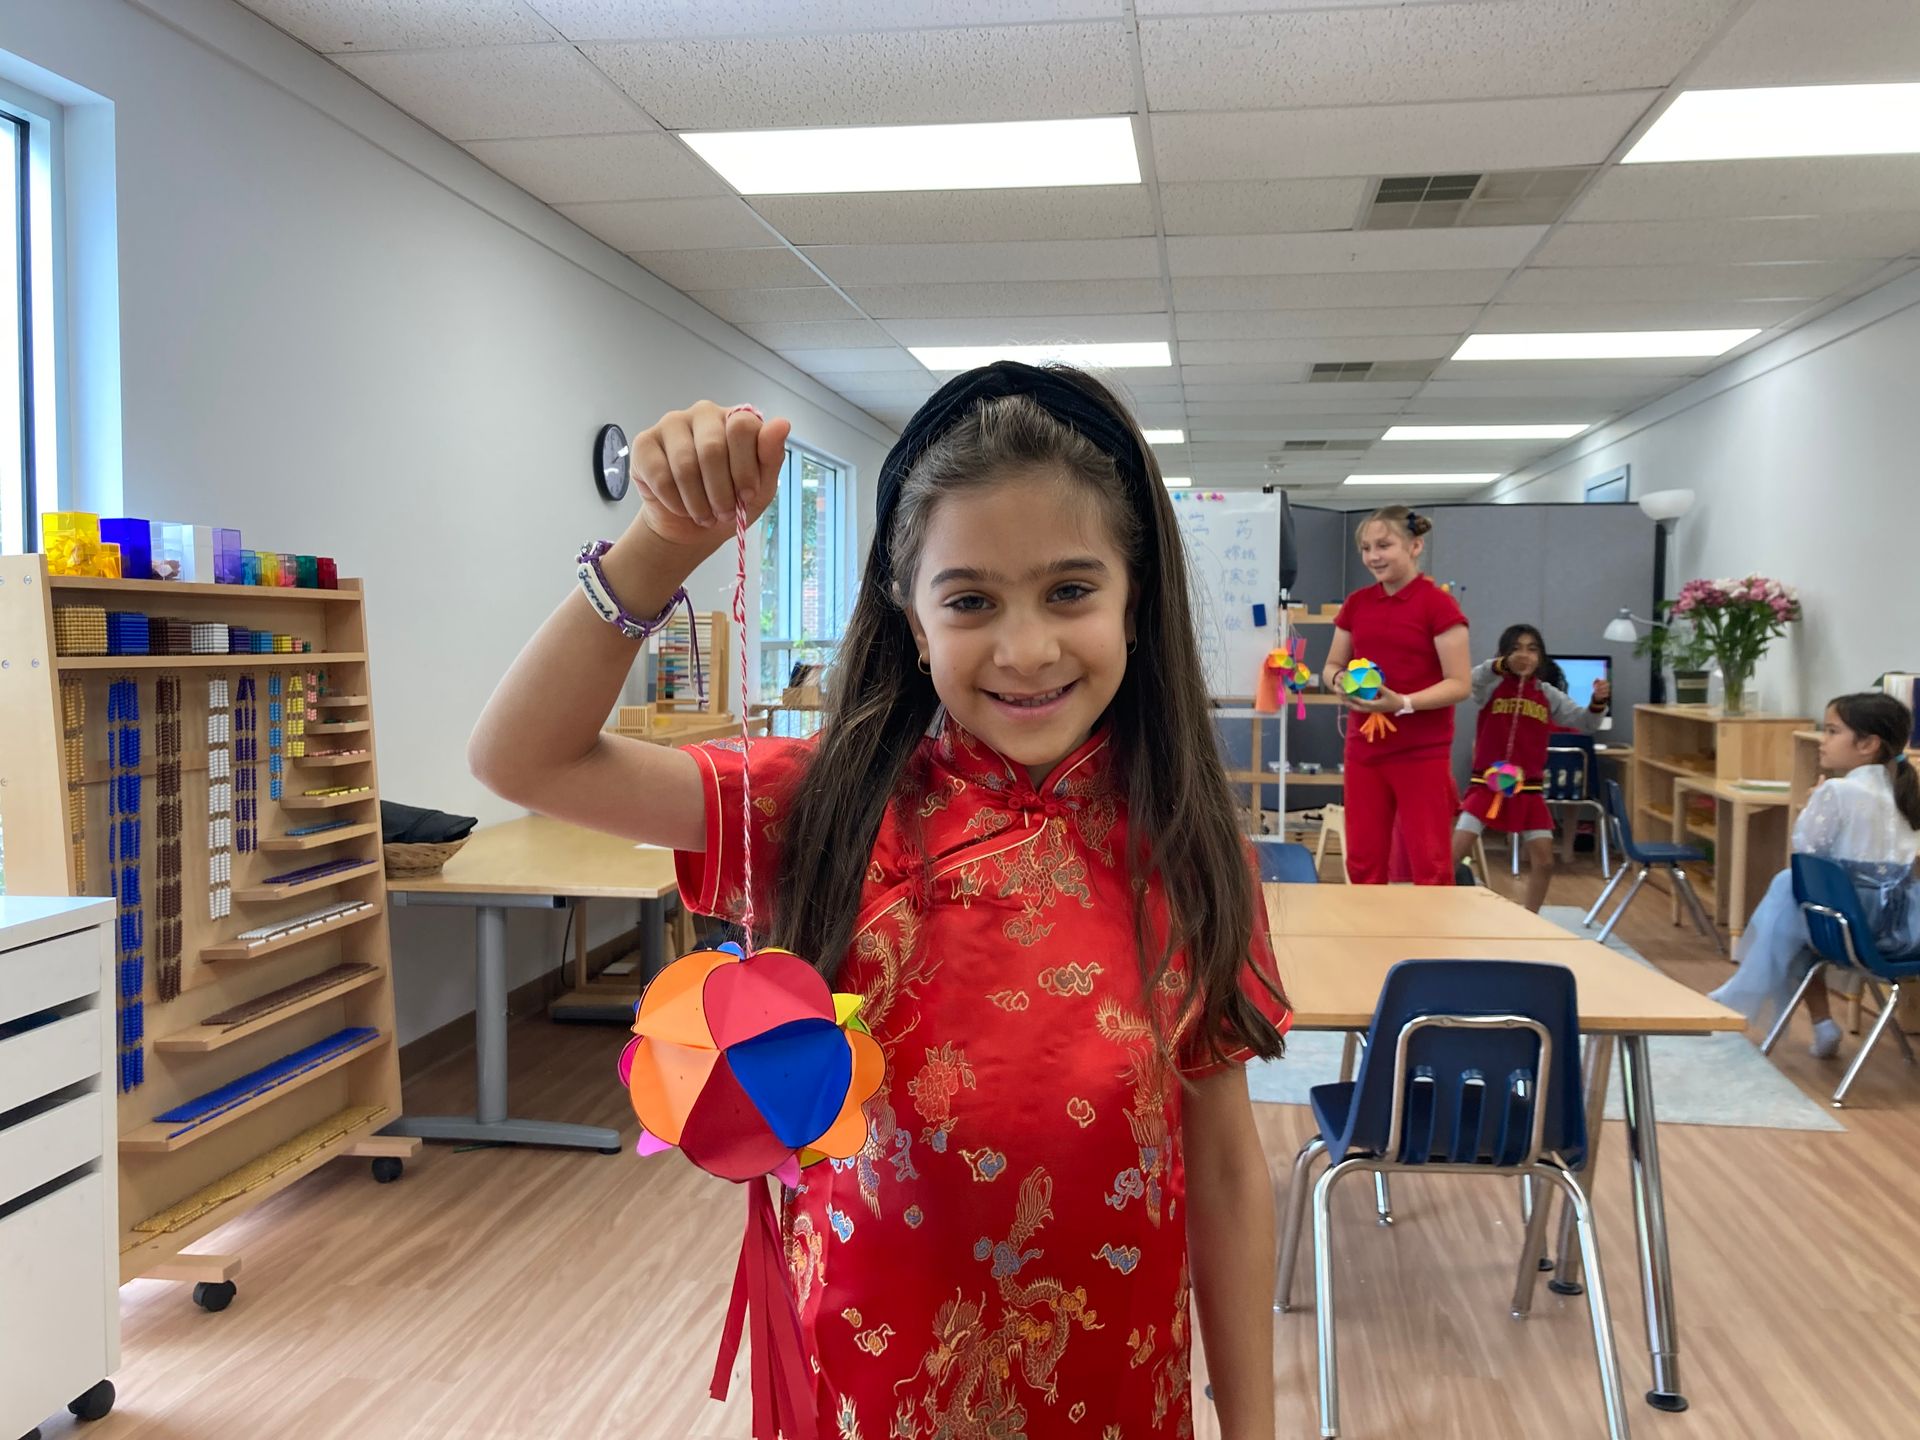 a Montessori child in a red dress is holding a ball in a classroom